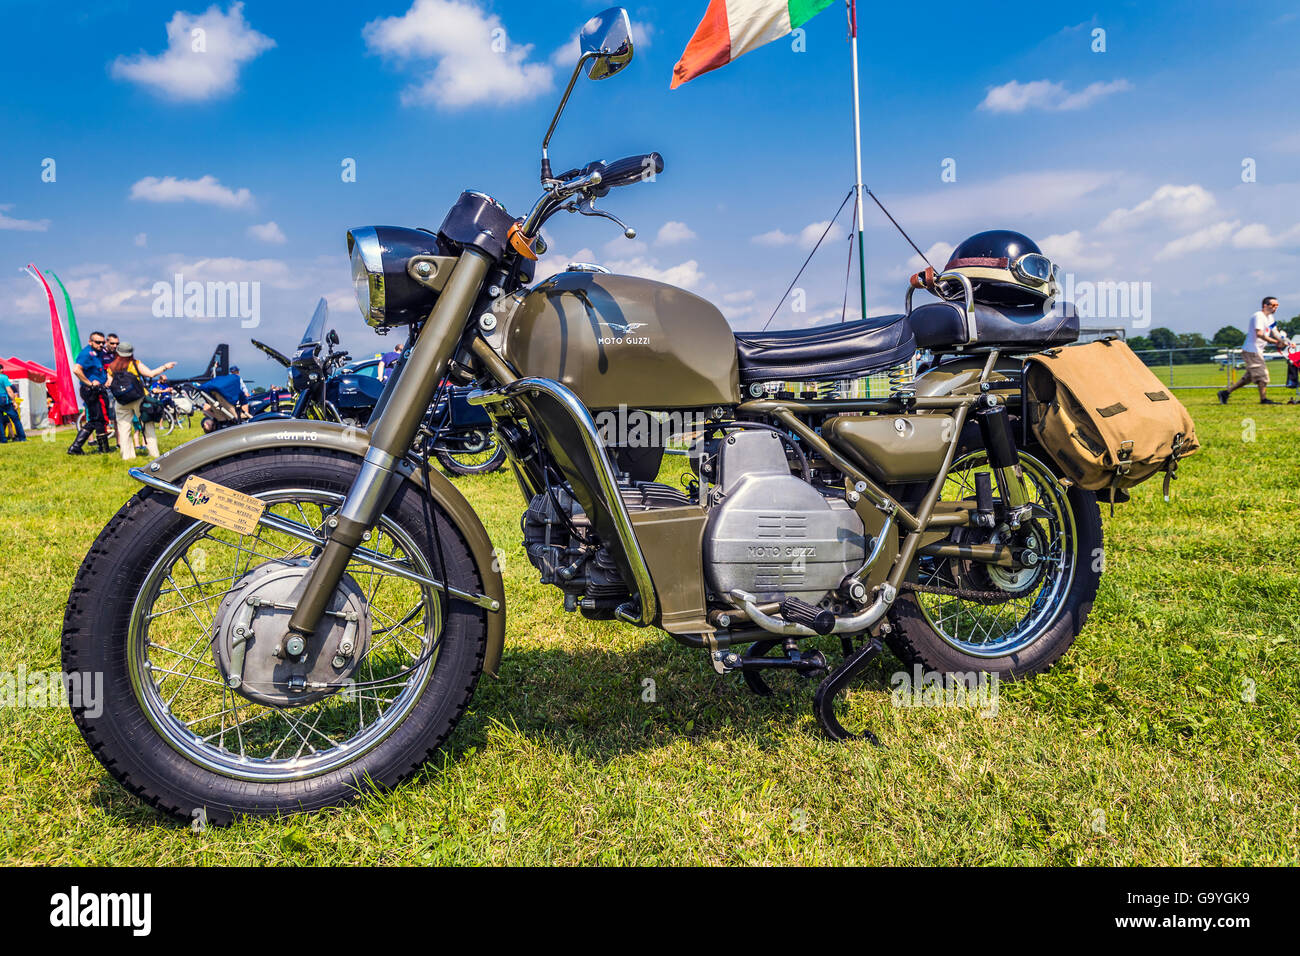 Italy Turin Collegno Aereoclub Event July 2, 2016 Centennial Airport Torino Aeritalia - 1916/2016, Ancient Moto Guzzi used From Carabinieri arms, Credit:  Realy Easy Star/Alamy Live News Stock Photo